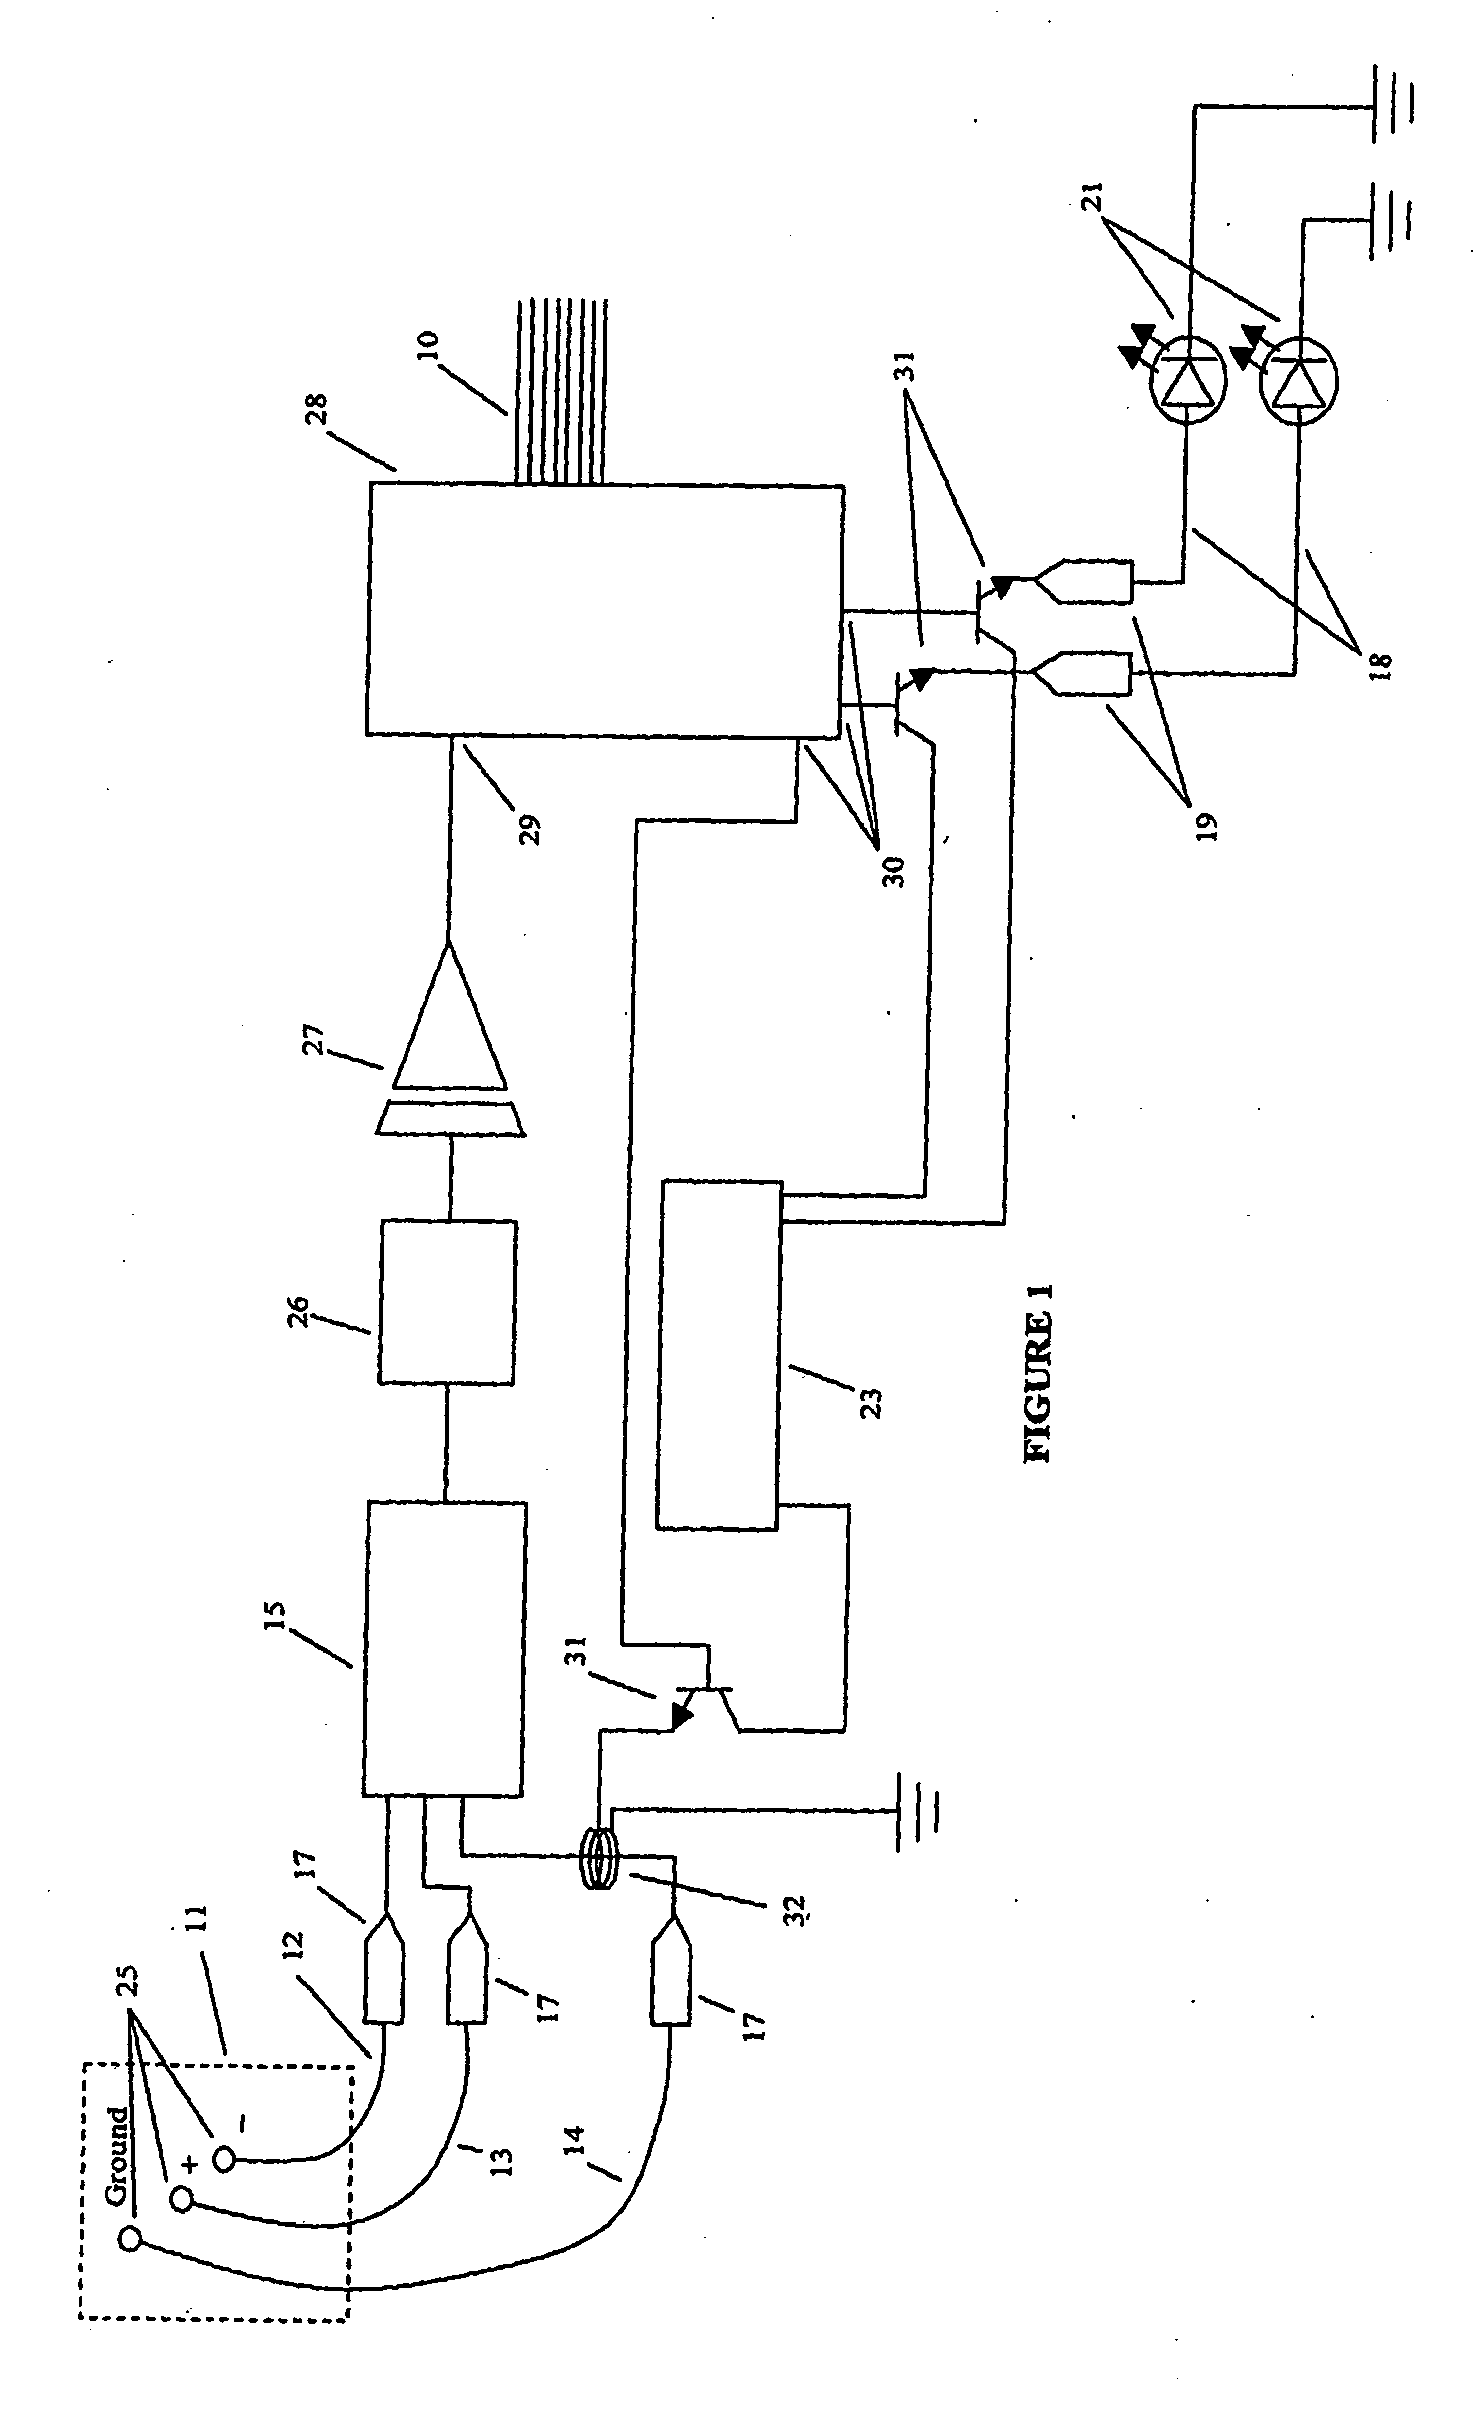 Methods and Apparatus for Electrical Stimulation of Tissues Using Signals that Minimize the Effects of Tissue Impedance